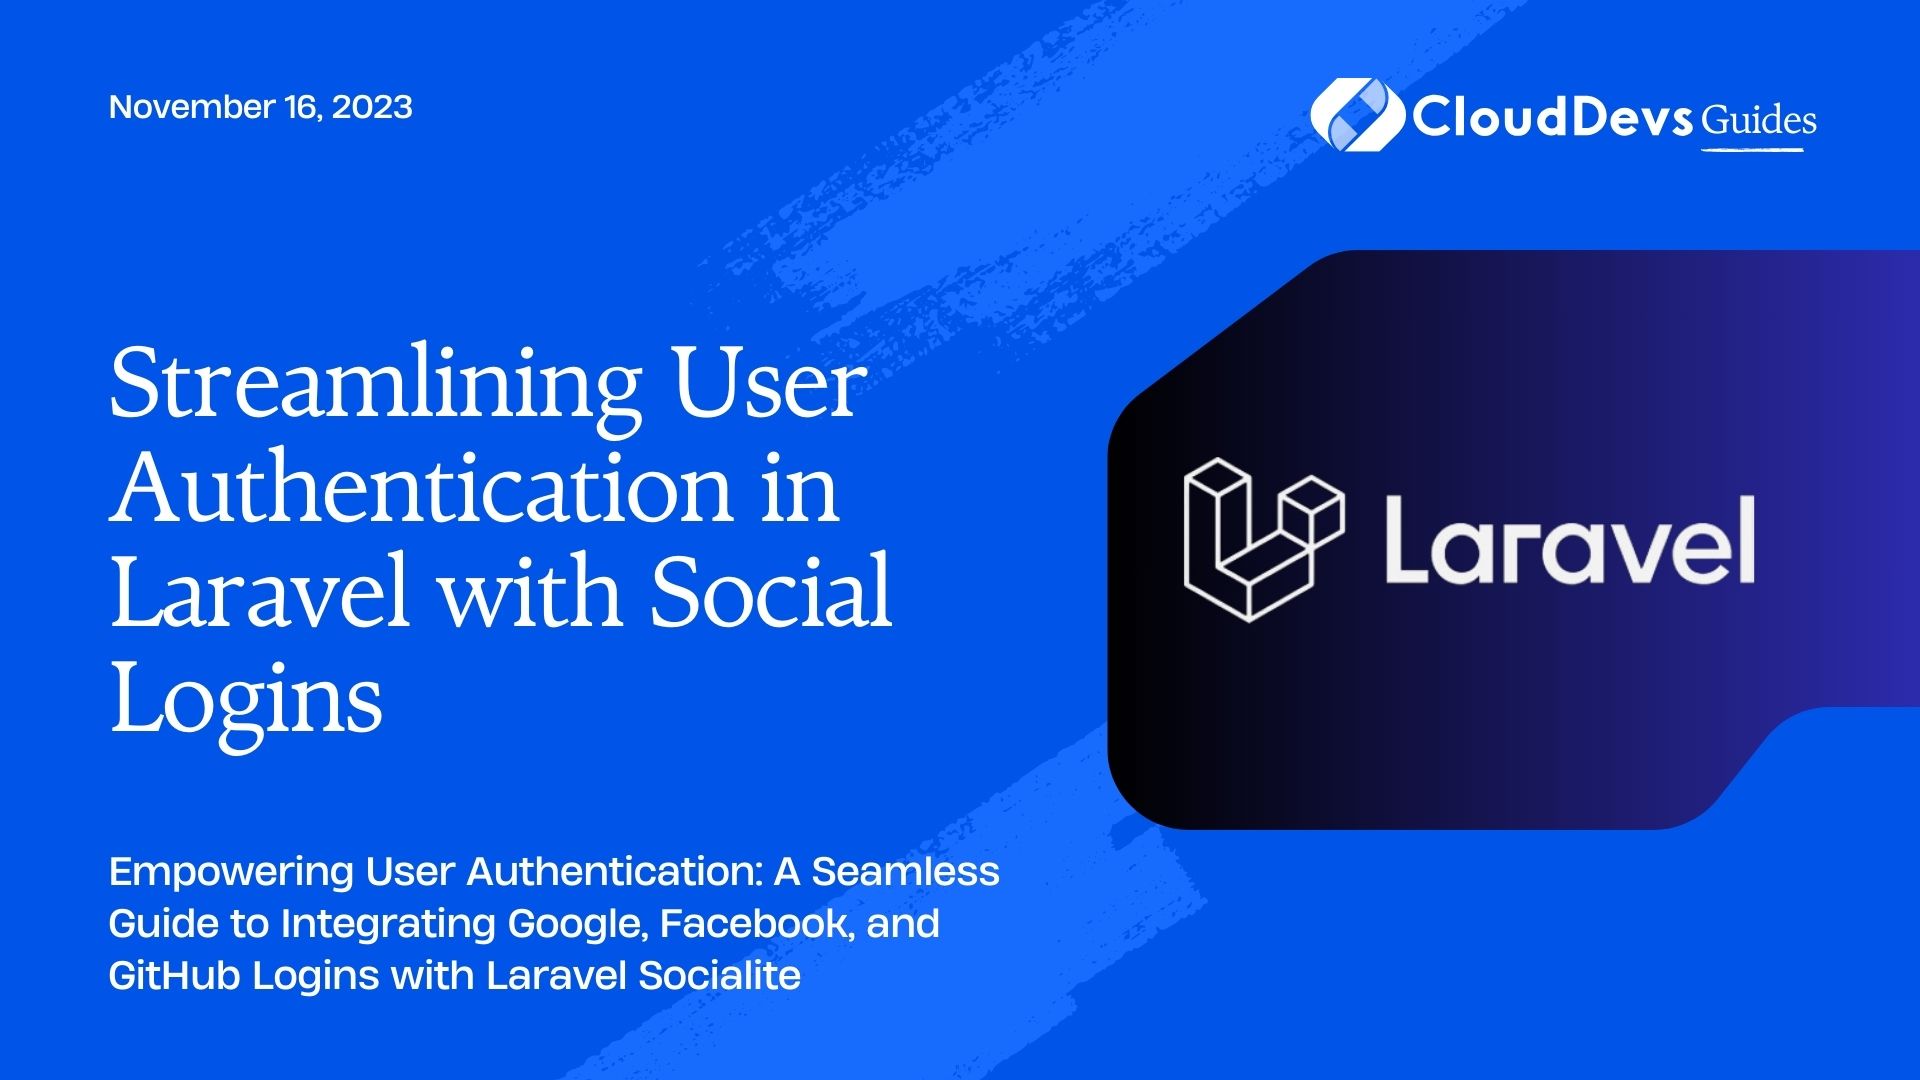 Streamlining User Authentication in Laravel with Social Logins